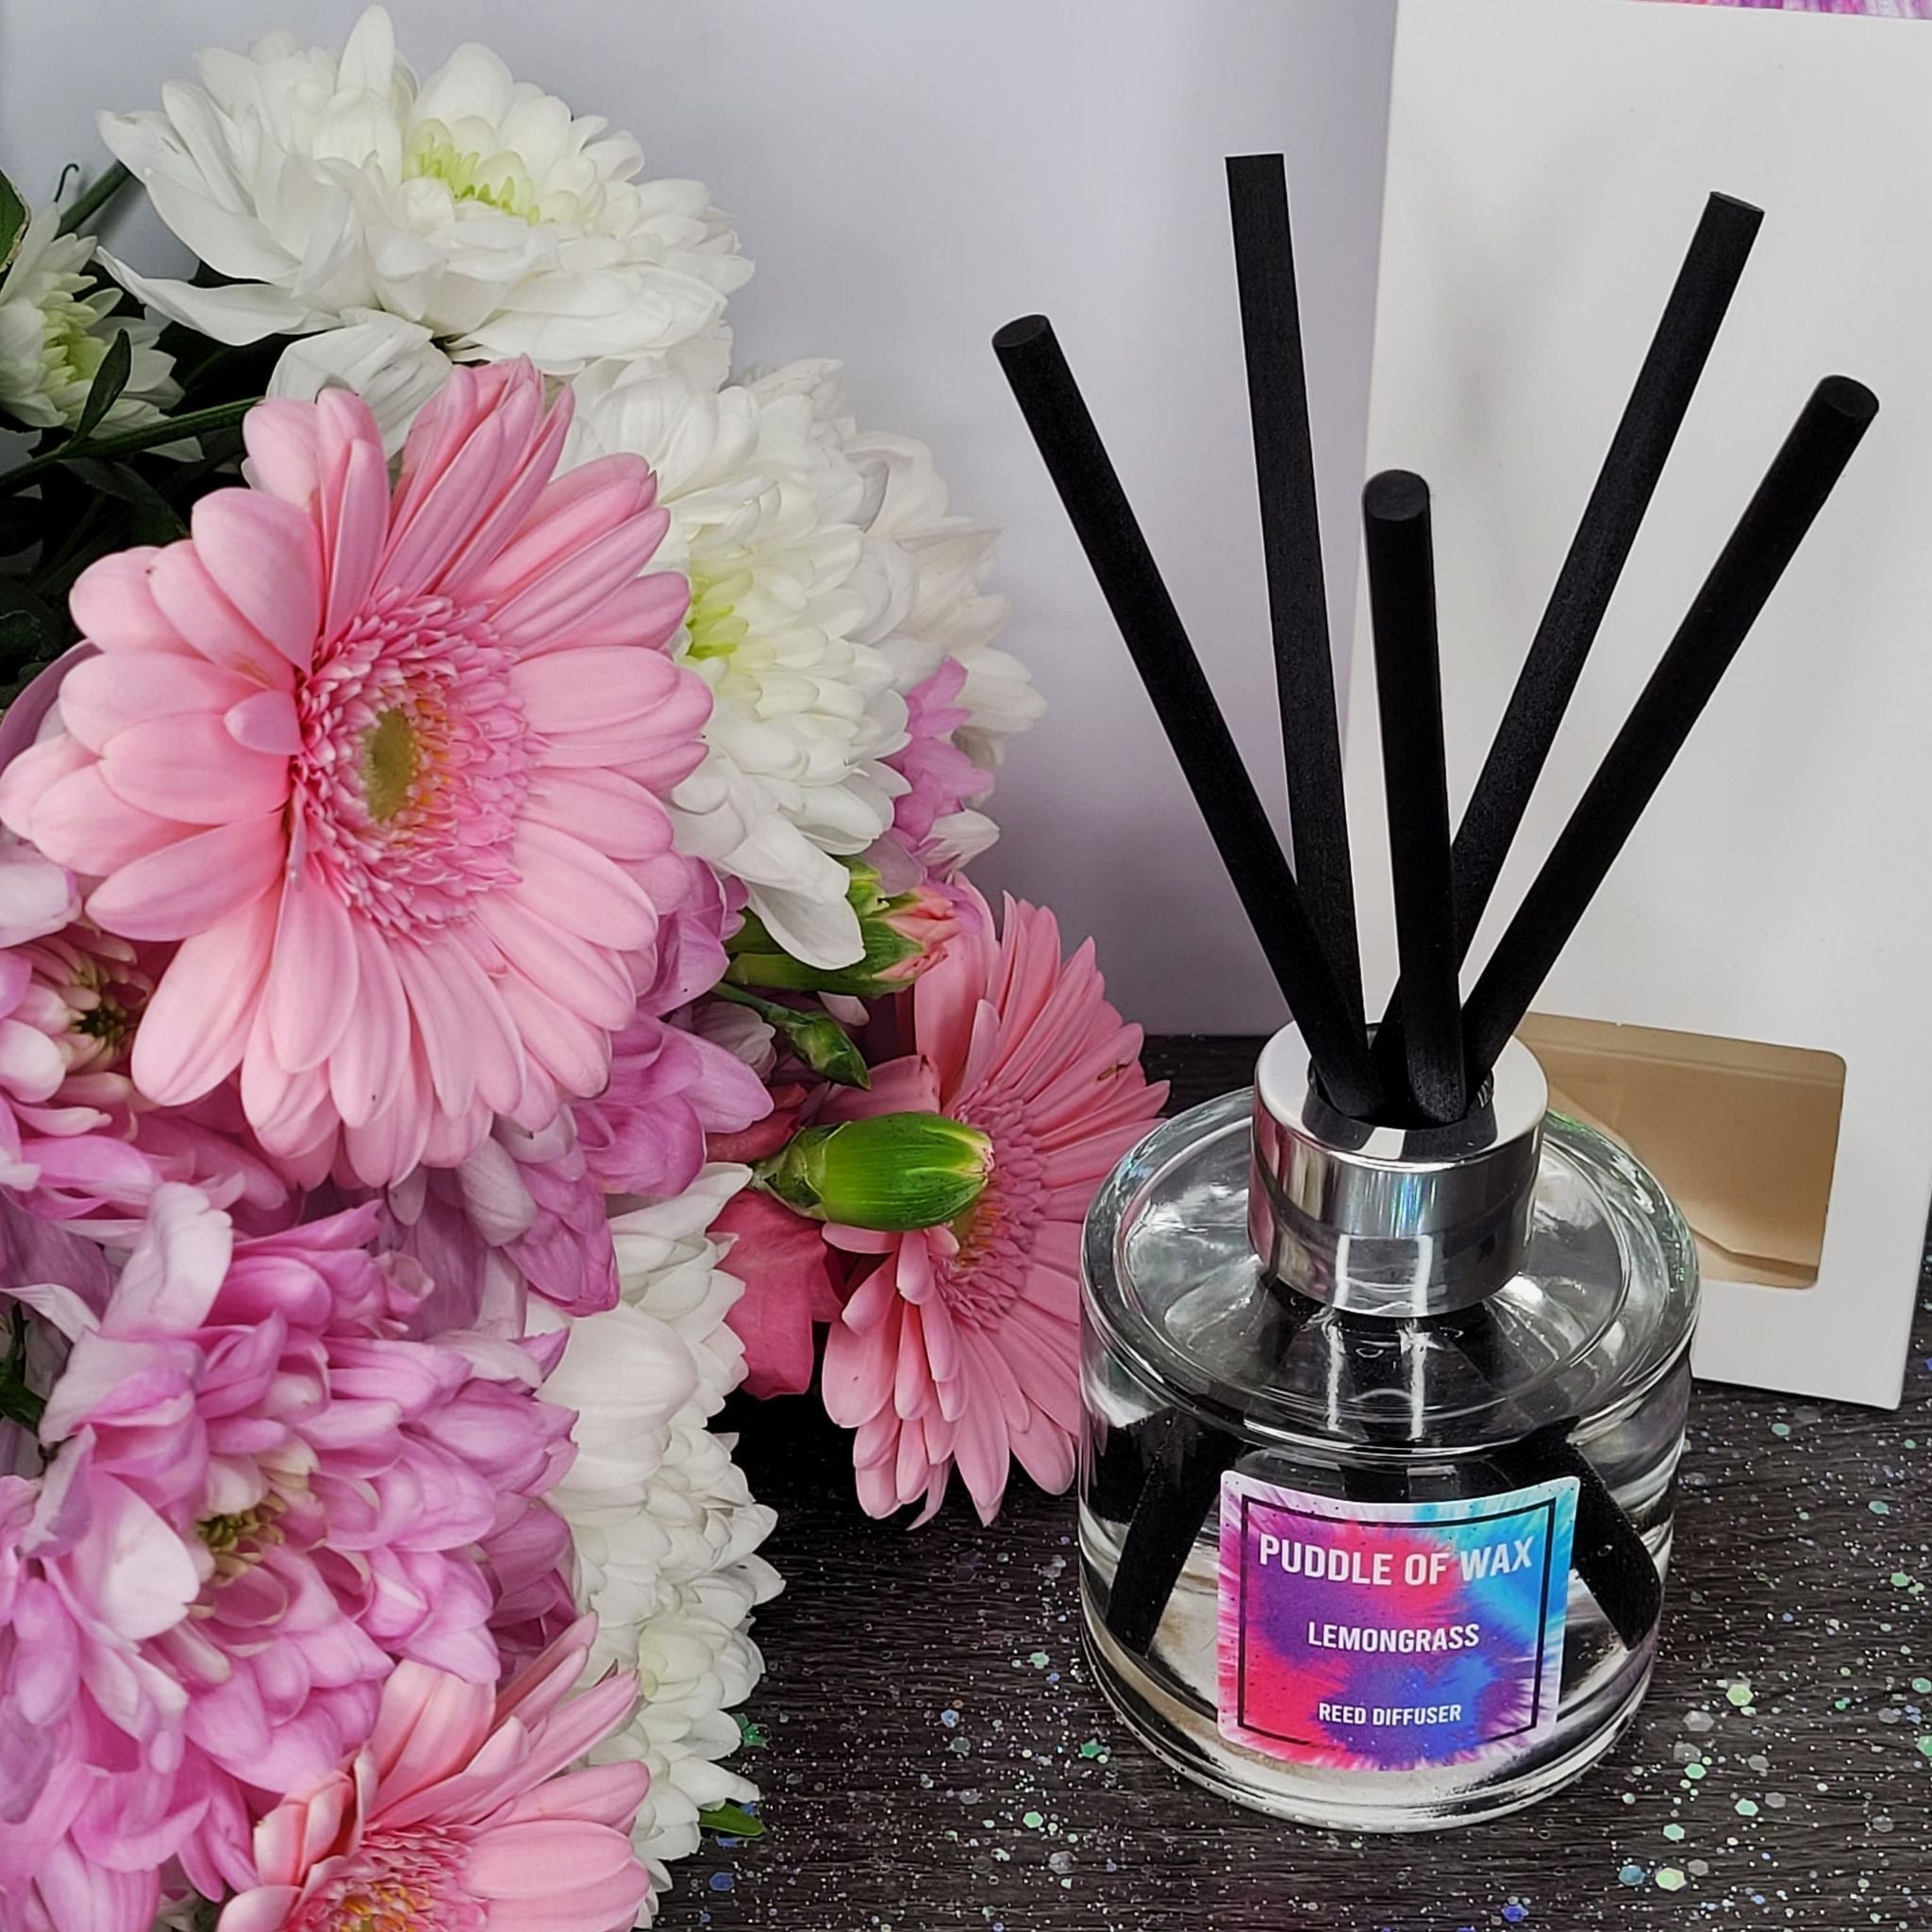 Rouge Reed Diffuser